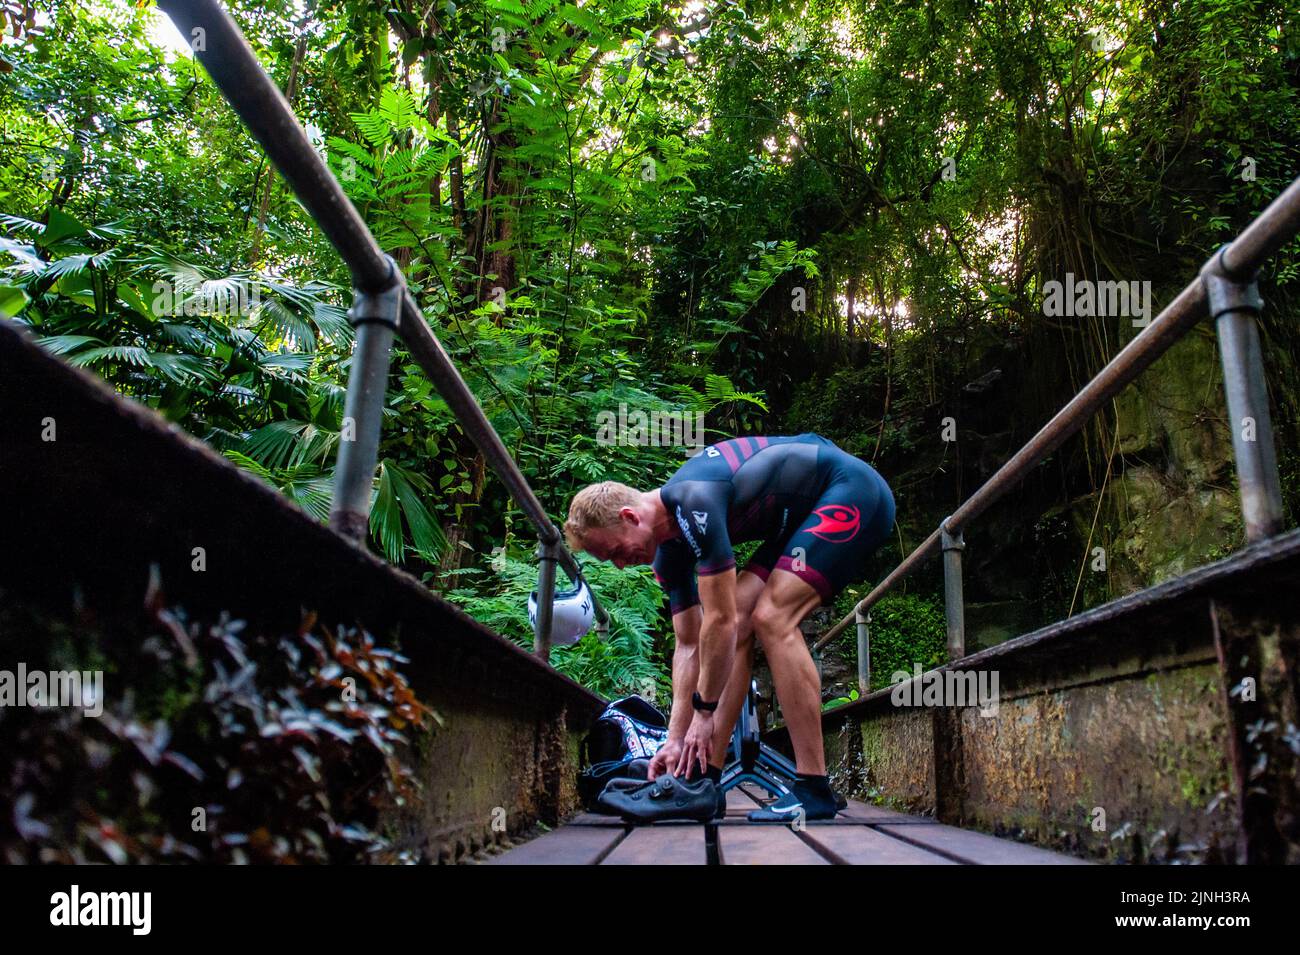 Athlete Olaf Van Den Bergh seen changing his shoes before starting training. Dutch top athlete Olaf Van Den Bergh starts training in the indoor tropical rainforest of the Burgers' Zoo in Arnhem, in preparation for the Ironman World Championships in Kailua-Kona located in Hawaii. The Bush (indoor tropical rainforest) is the ideal training location because of the high humidity and temperature. (Photo by Ana Fernandez / SOPA Images/Sipa USA) Stock Photo